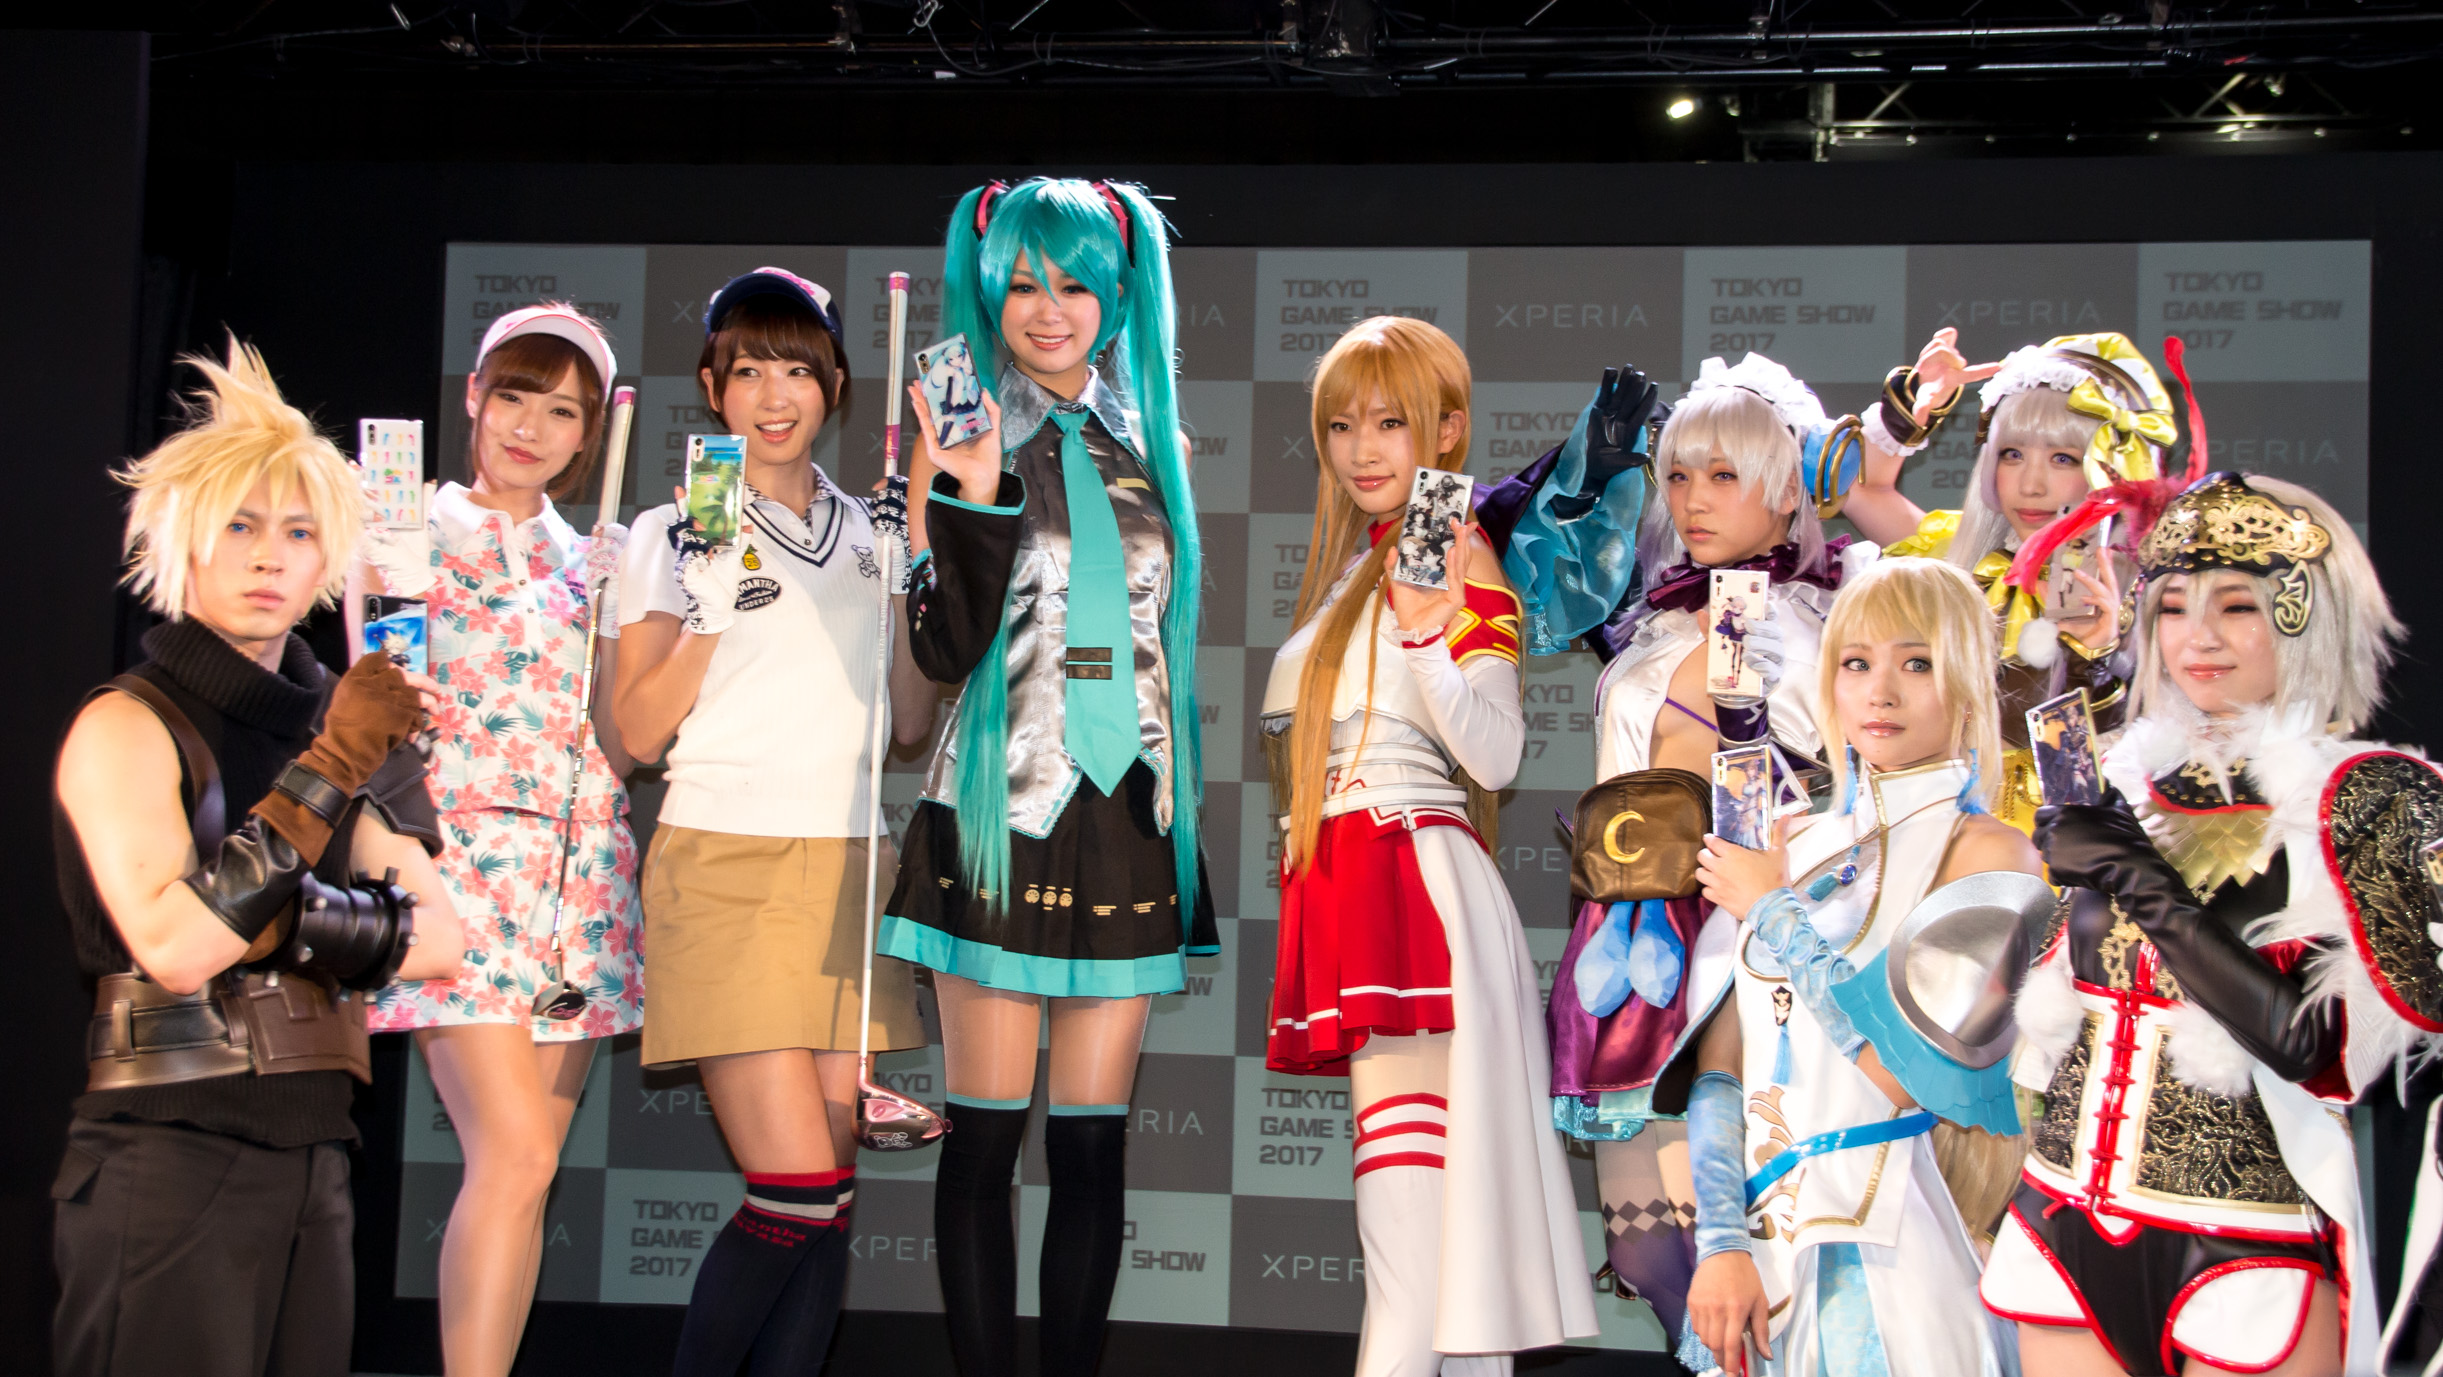 Ffキャラや初音ミクなどコスプレイヤー勢揃い 東京ゲームショウ17 Xperiaステージイベント Tgs17 Time To Live Forever